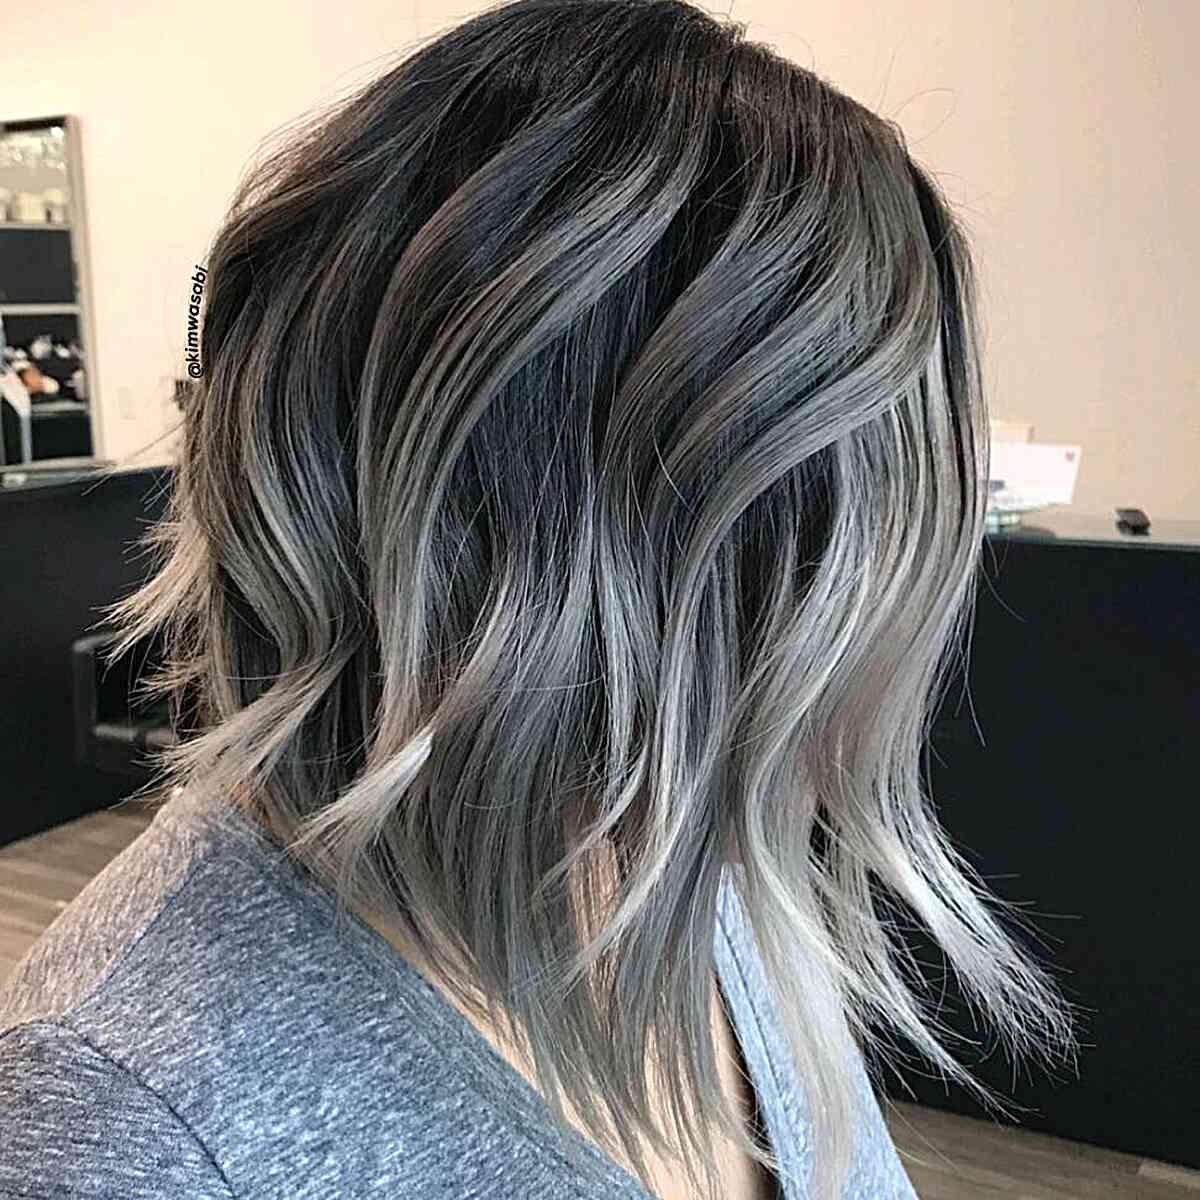 Black to Silver Ombre Textured Lob